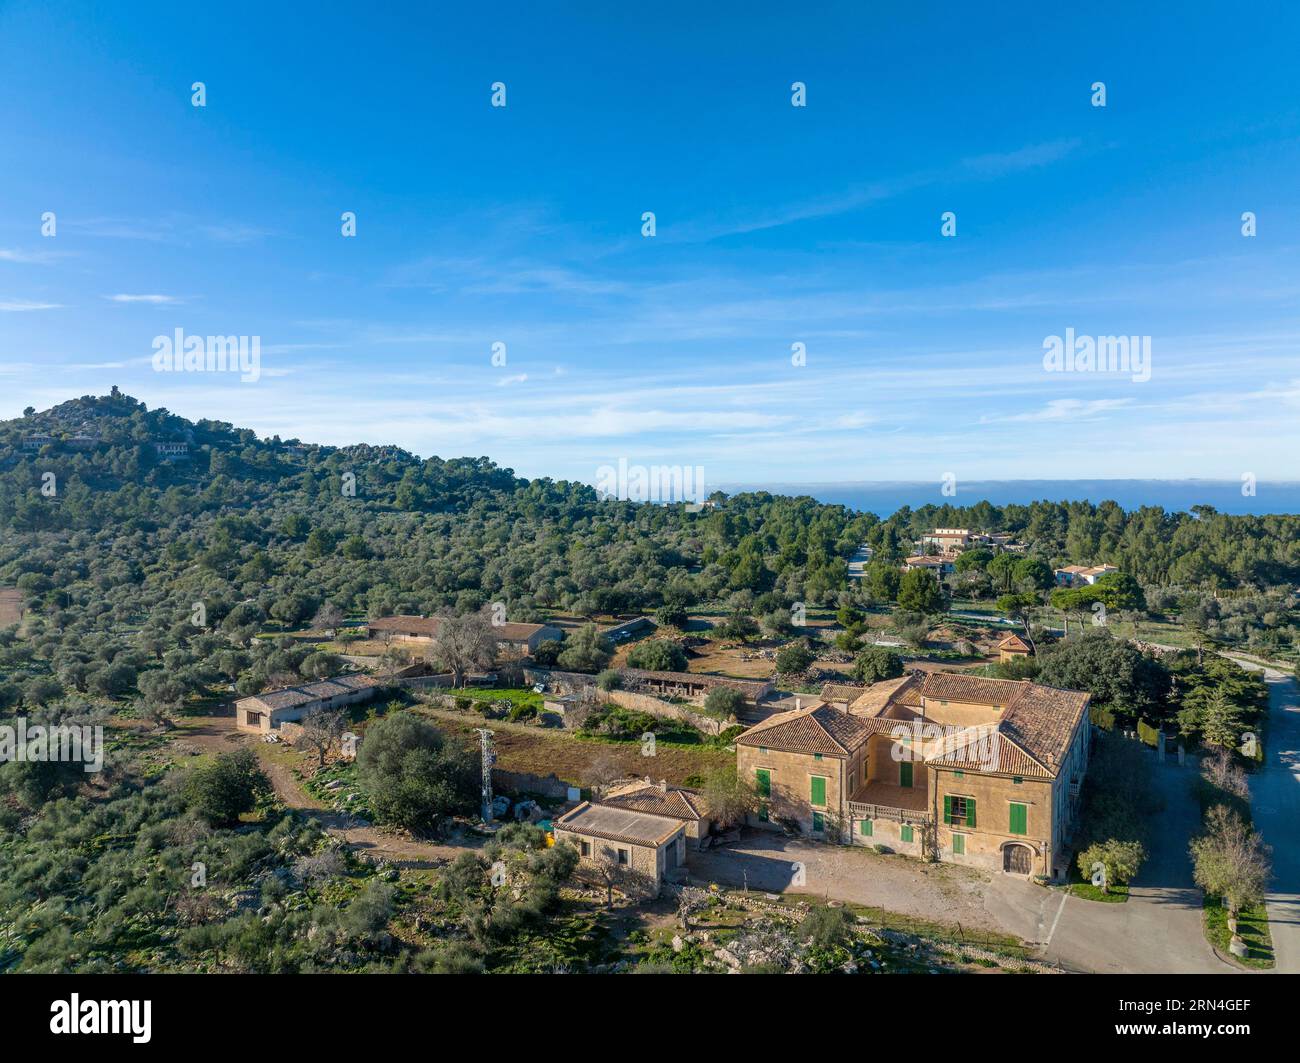 Aerial view, agricultural property, Valldemossa, Mallorca, Balearic Islands, Spain Stock Photo